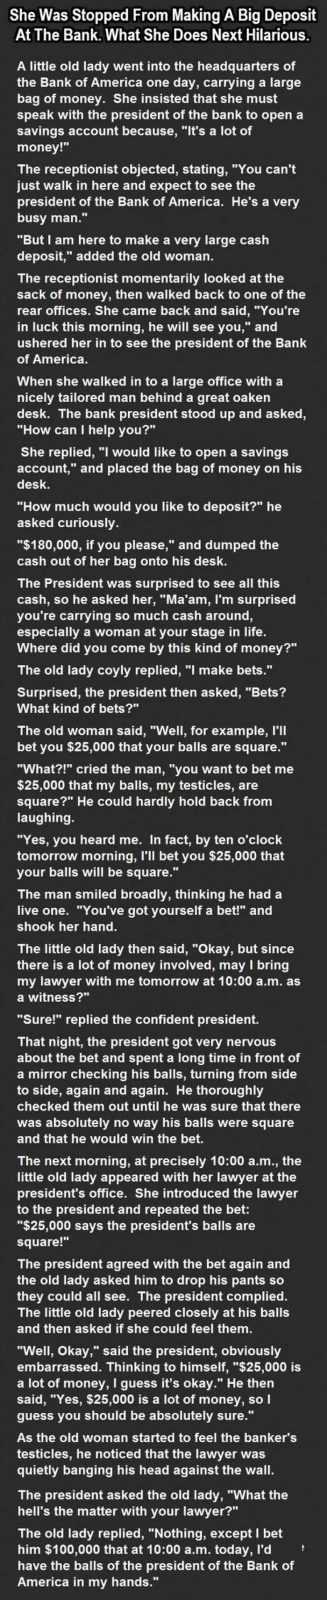 Short Story Hilarious one about an old lady's revenge